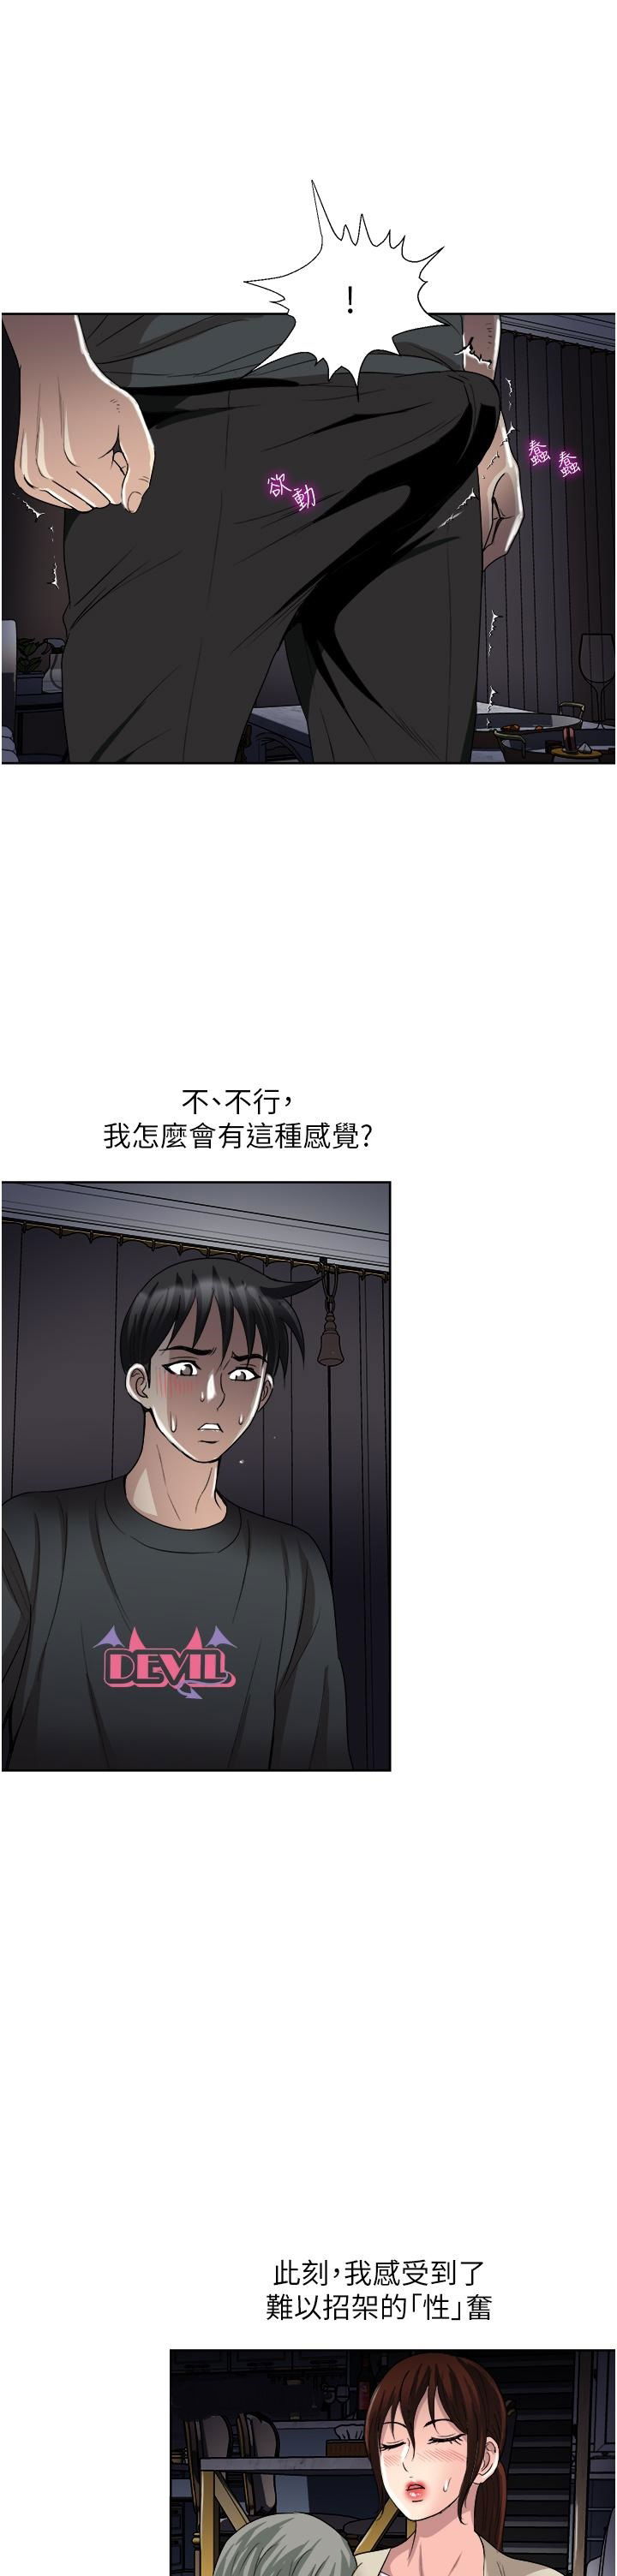 just-once-raw-chap-27-26